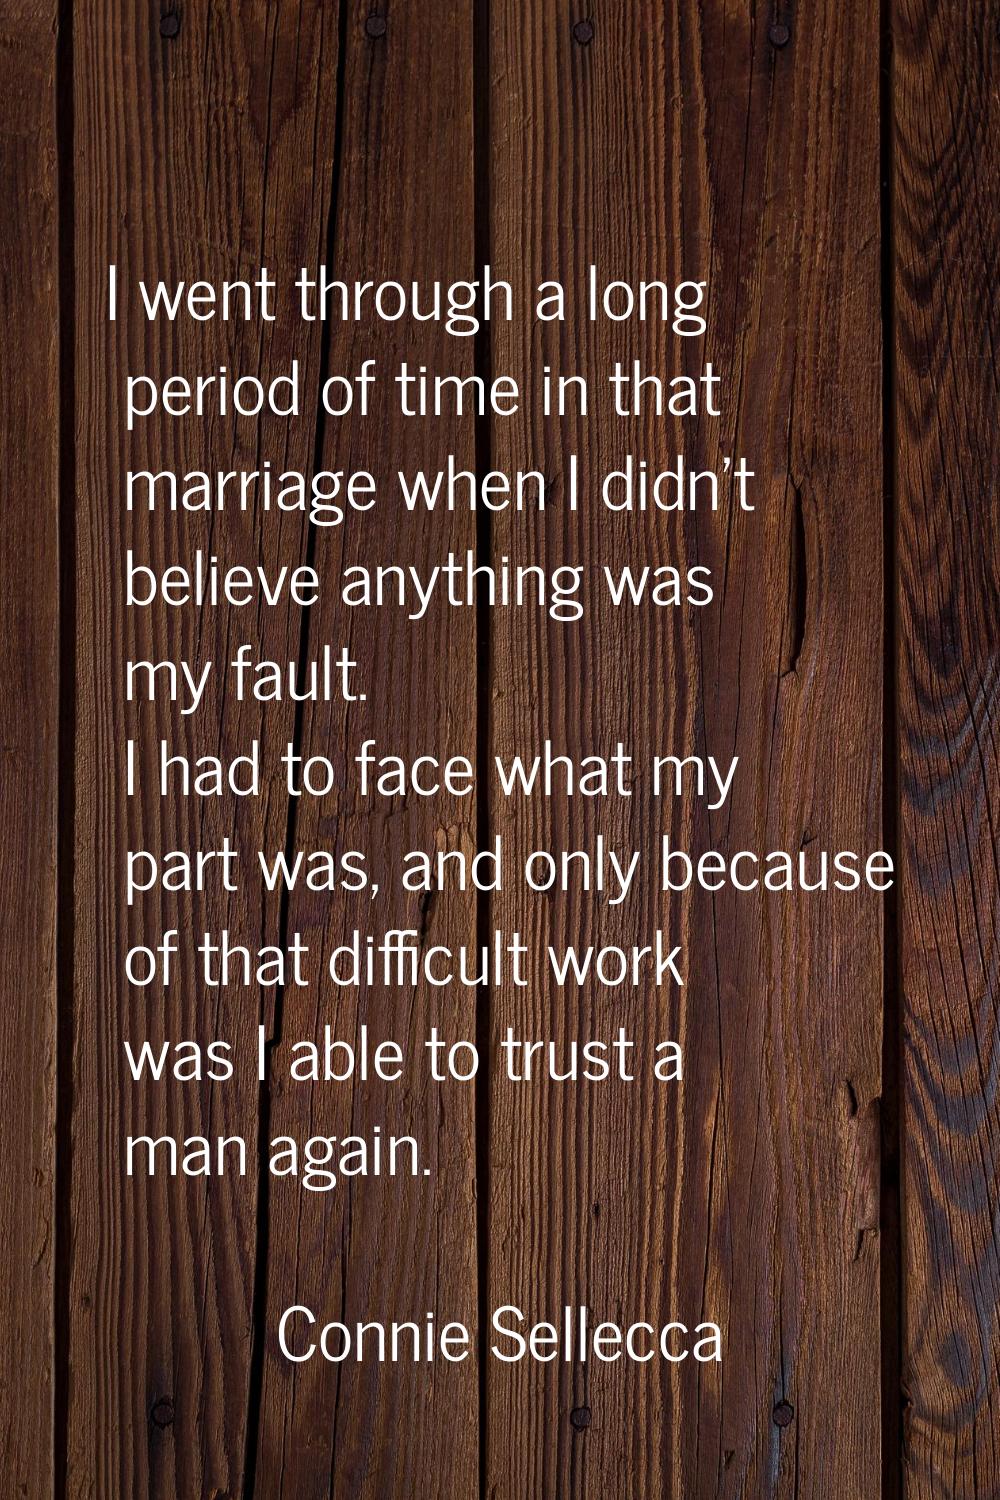 I went through a long period of time in that marriage when I didn't believe anything was my fault. 